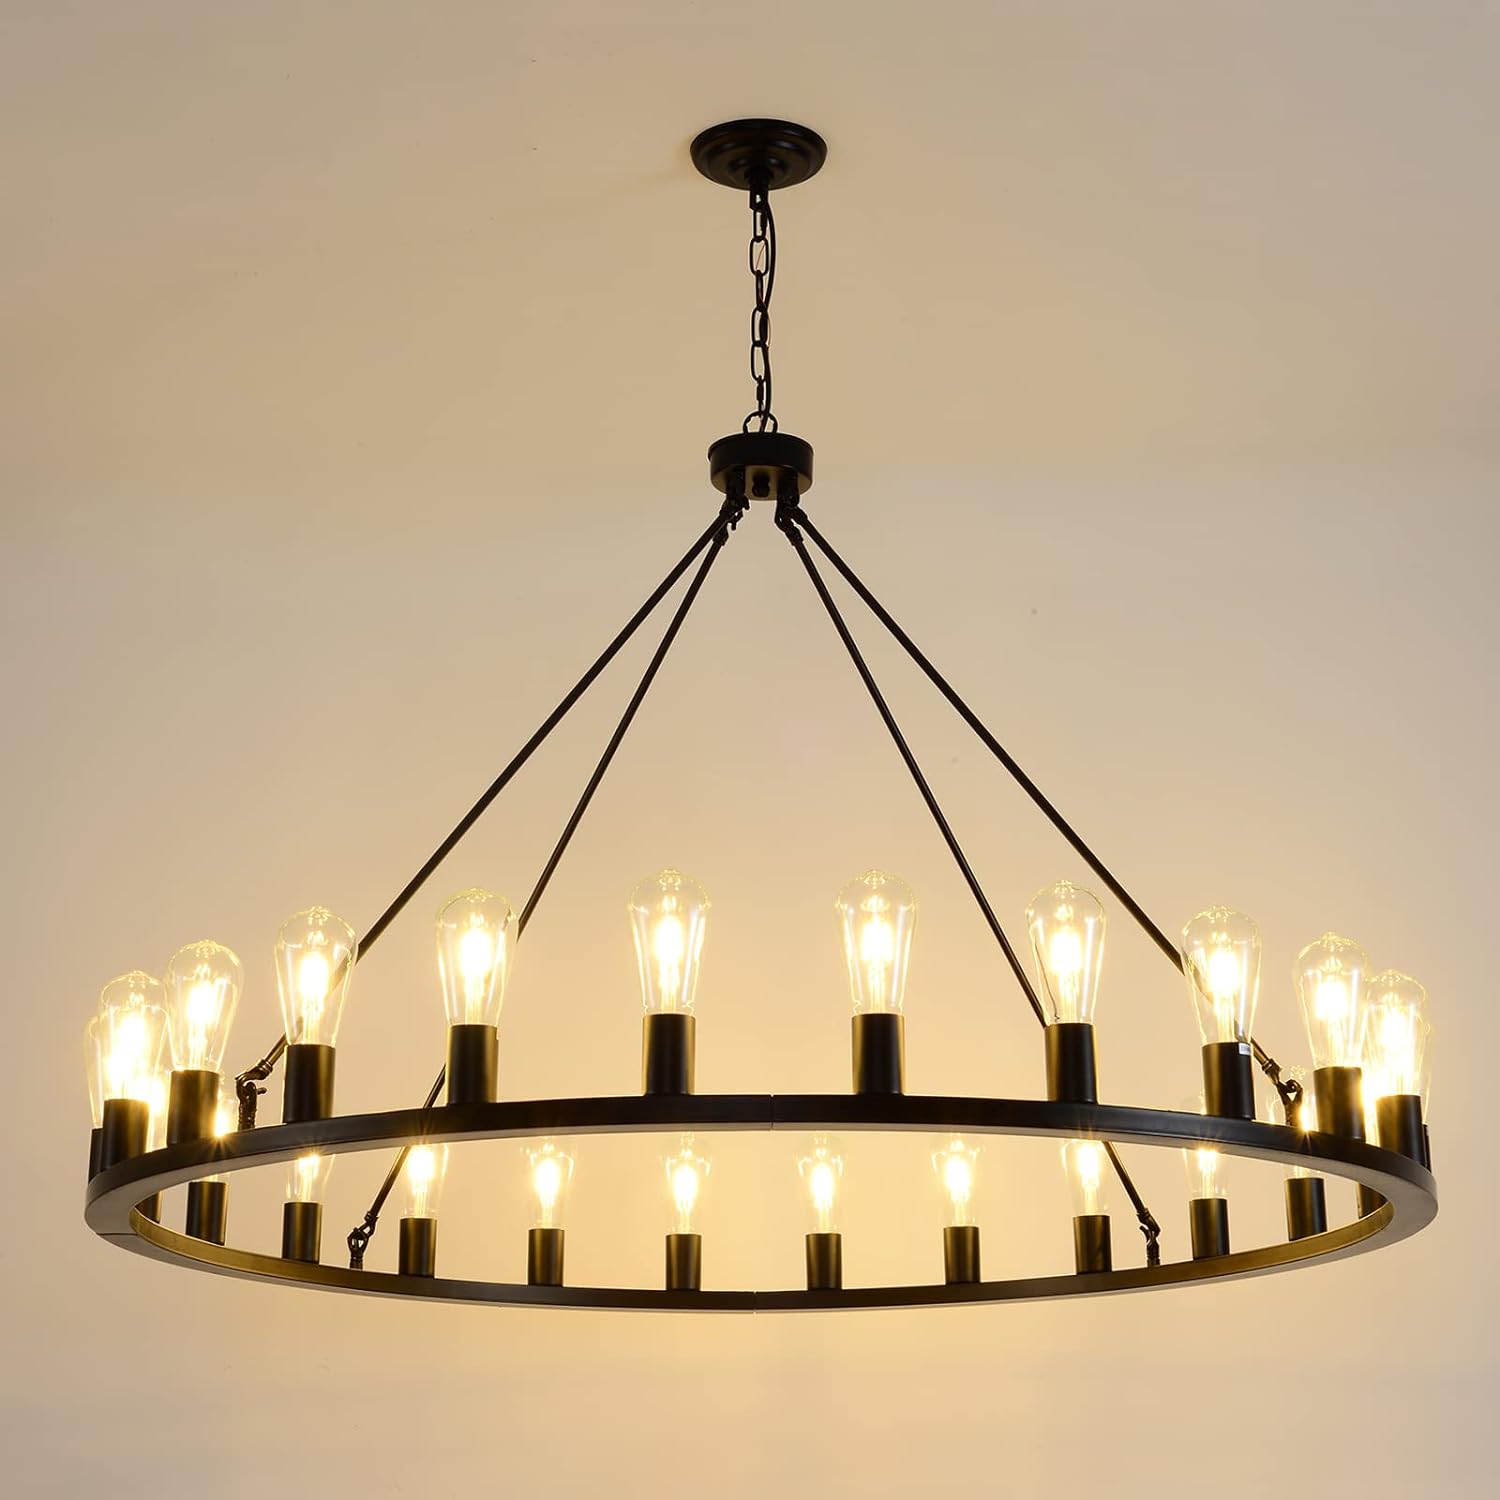 TKM Home Wagon Wheel Chandelier 24-Light 48-Inch, Black Round Rustic Farmhouse Chandelier Extra Large For High Ceilings, Dini?